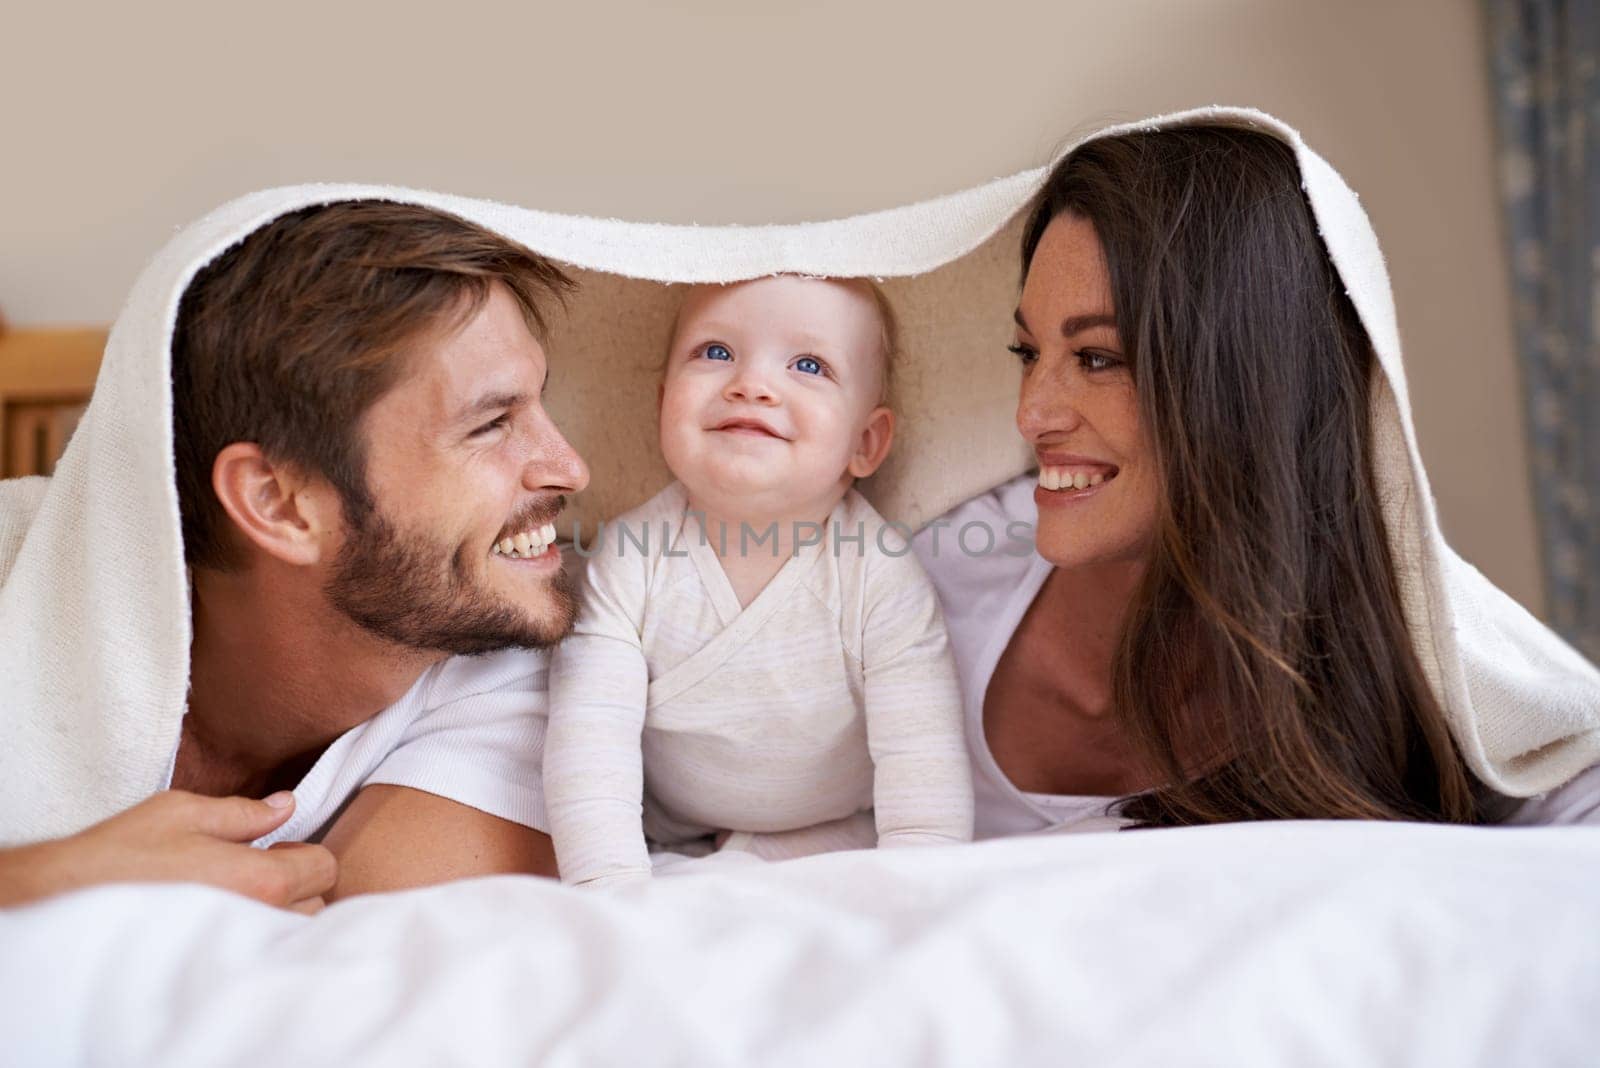 Happy family, parents and baby with blanket on bed for love, care and quality time together. Mother, father and playful newborn child relaxing in bedroom with bedding fort, smile and bonding at home.